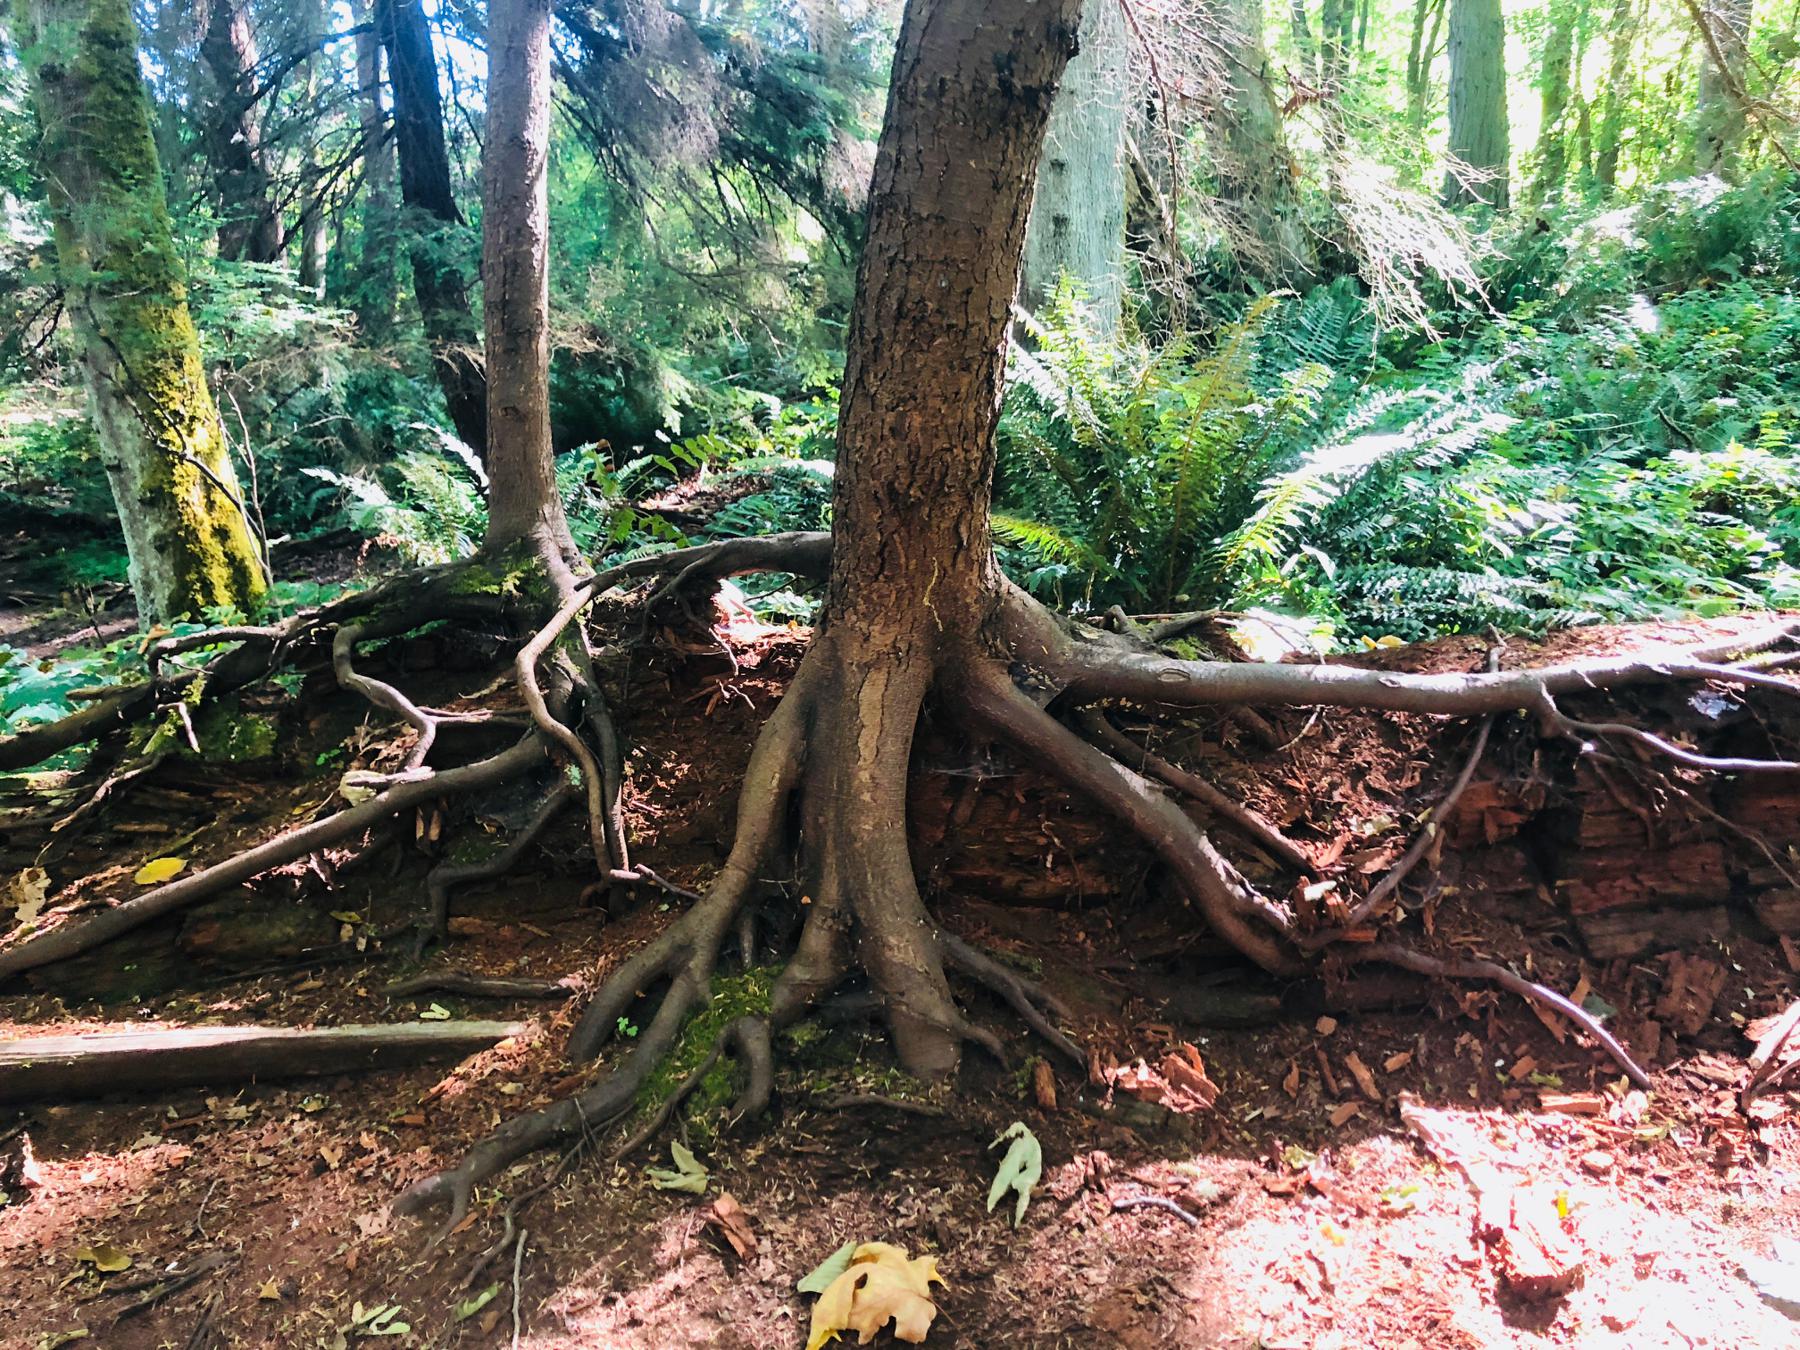 trees growing from a decaying collapsed tree trunk